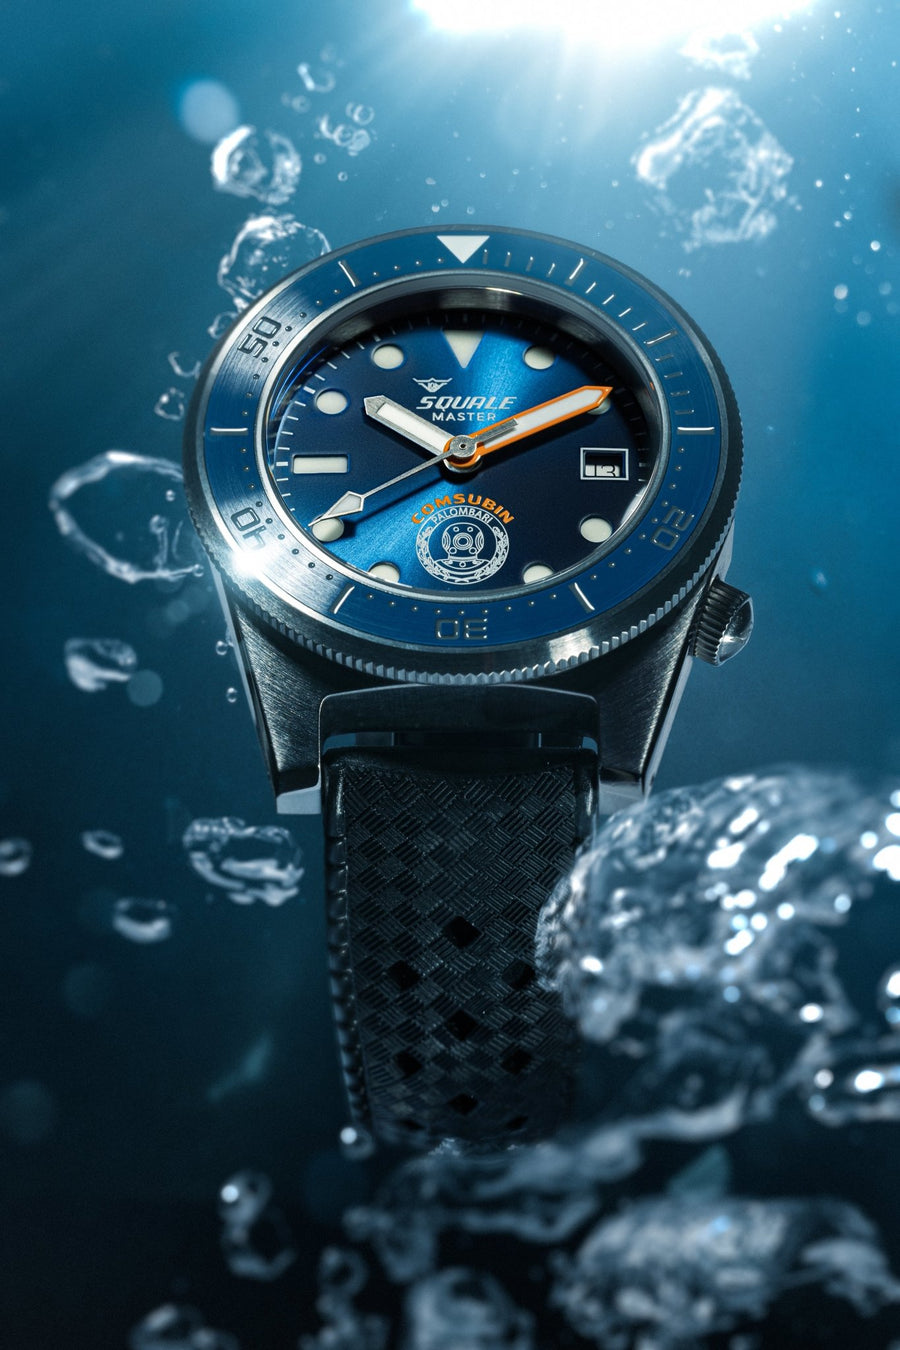 Squale Master X Palombari Del Comsubin - The Independent Collective